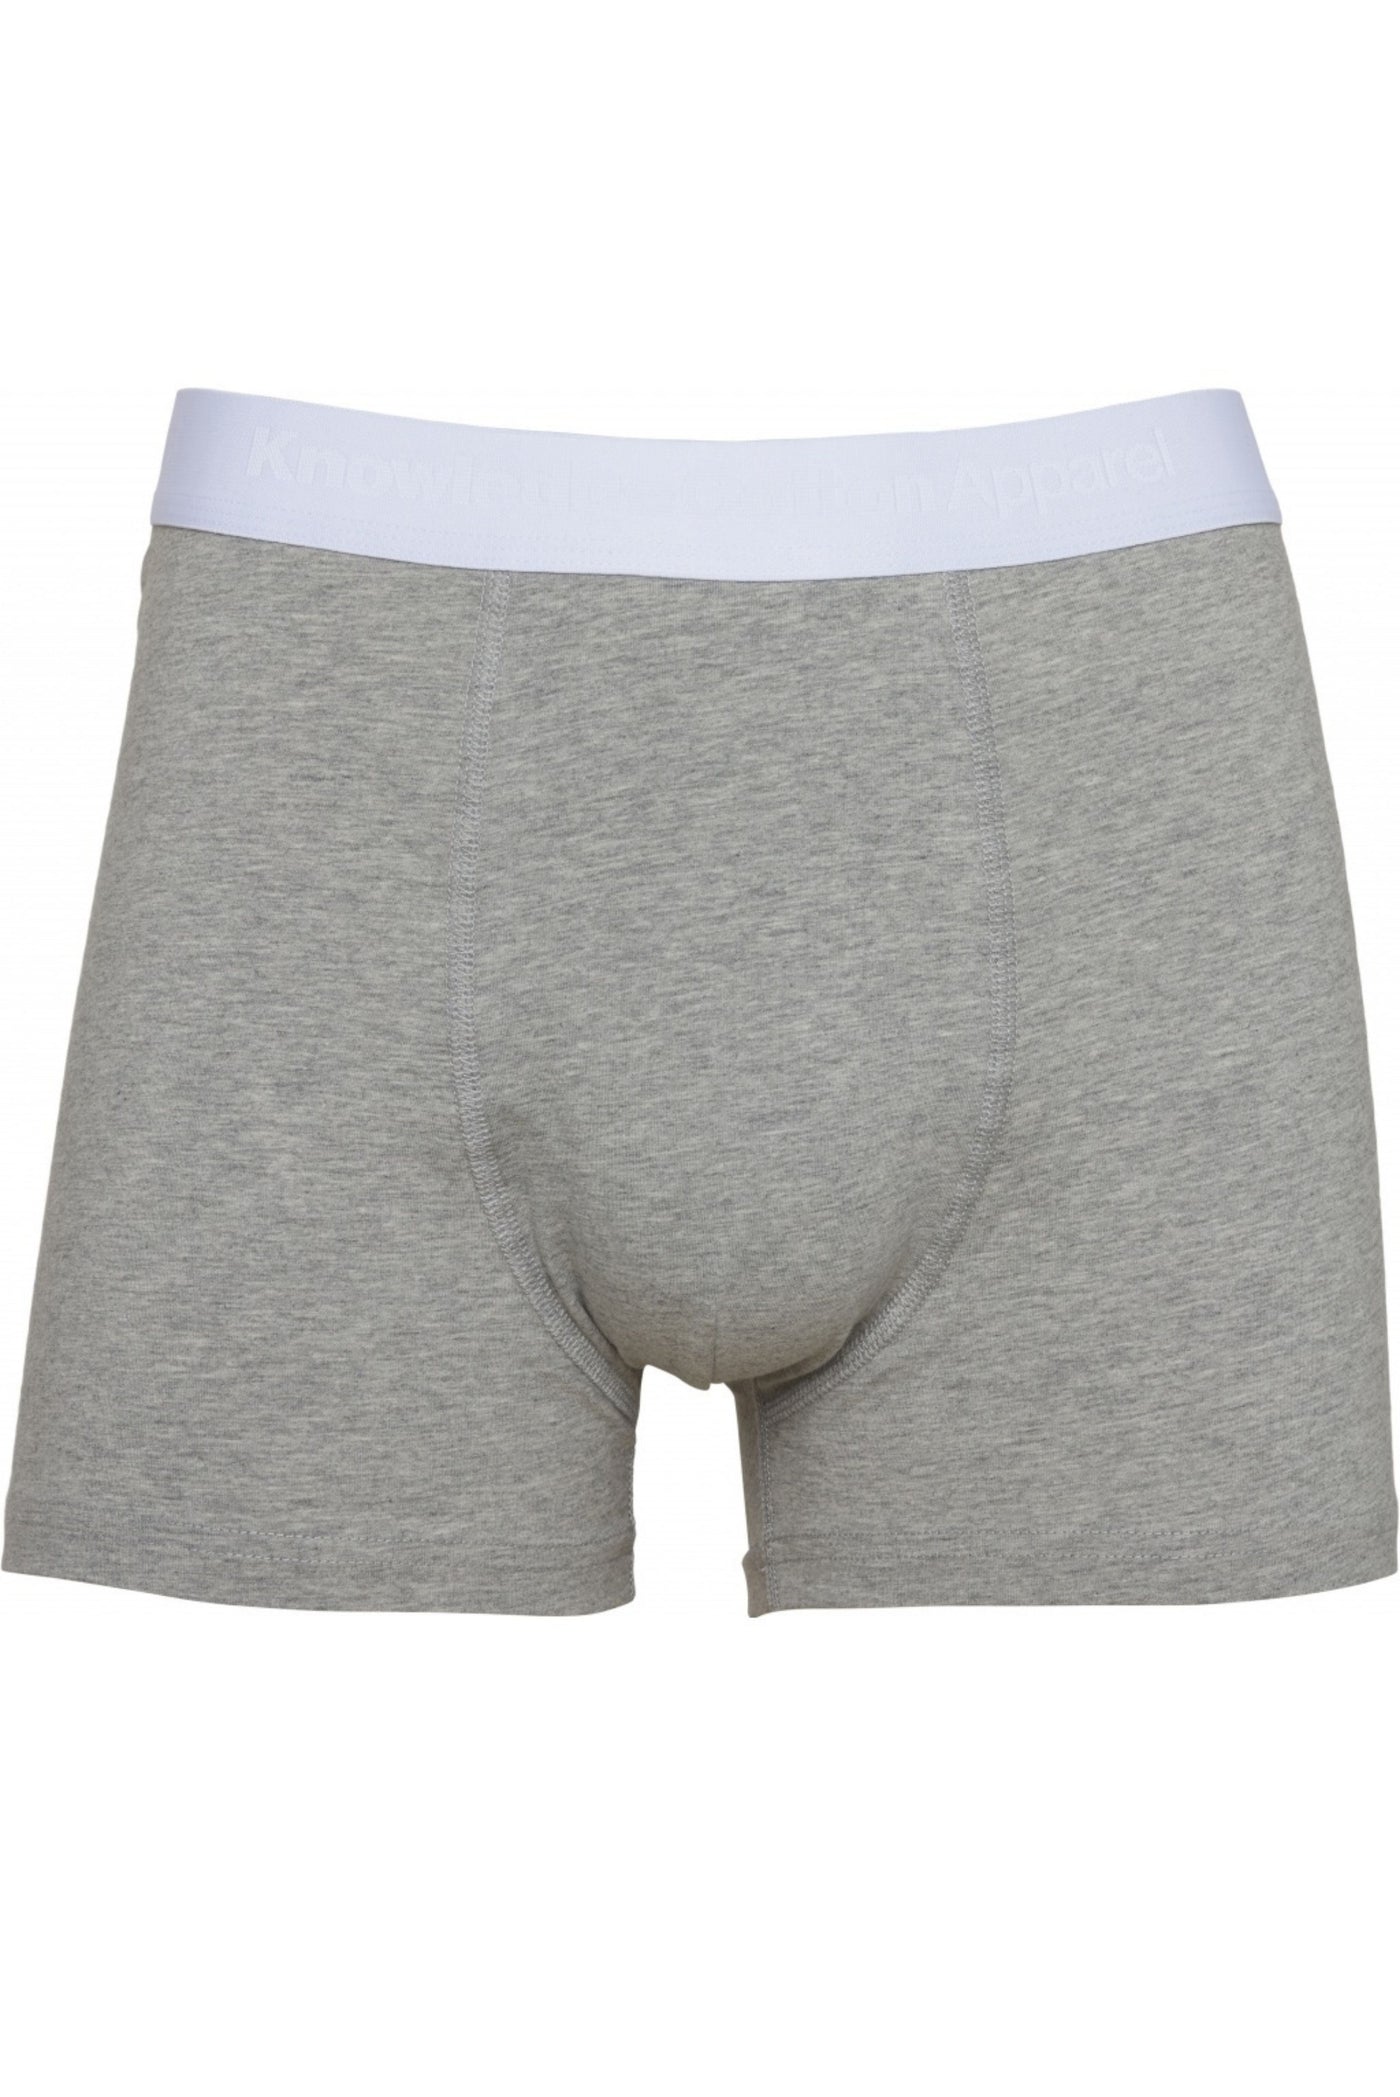 Knowledge Cotton Apparel Anker Maple 3 Pack Underwear-Mens-Ohh! By Gum - Shop Sustainable